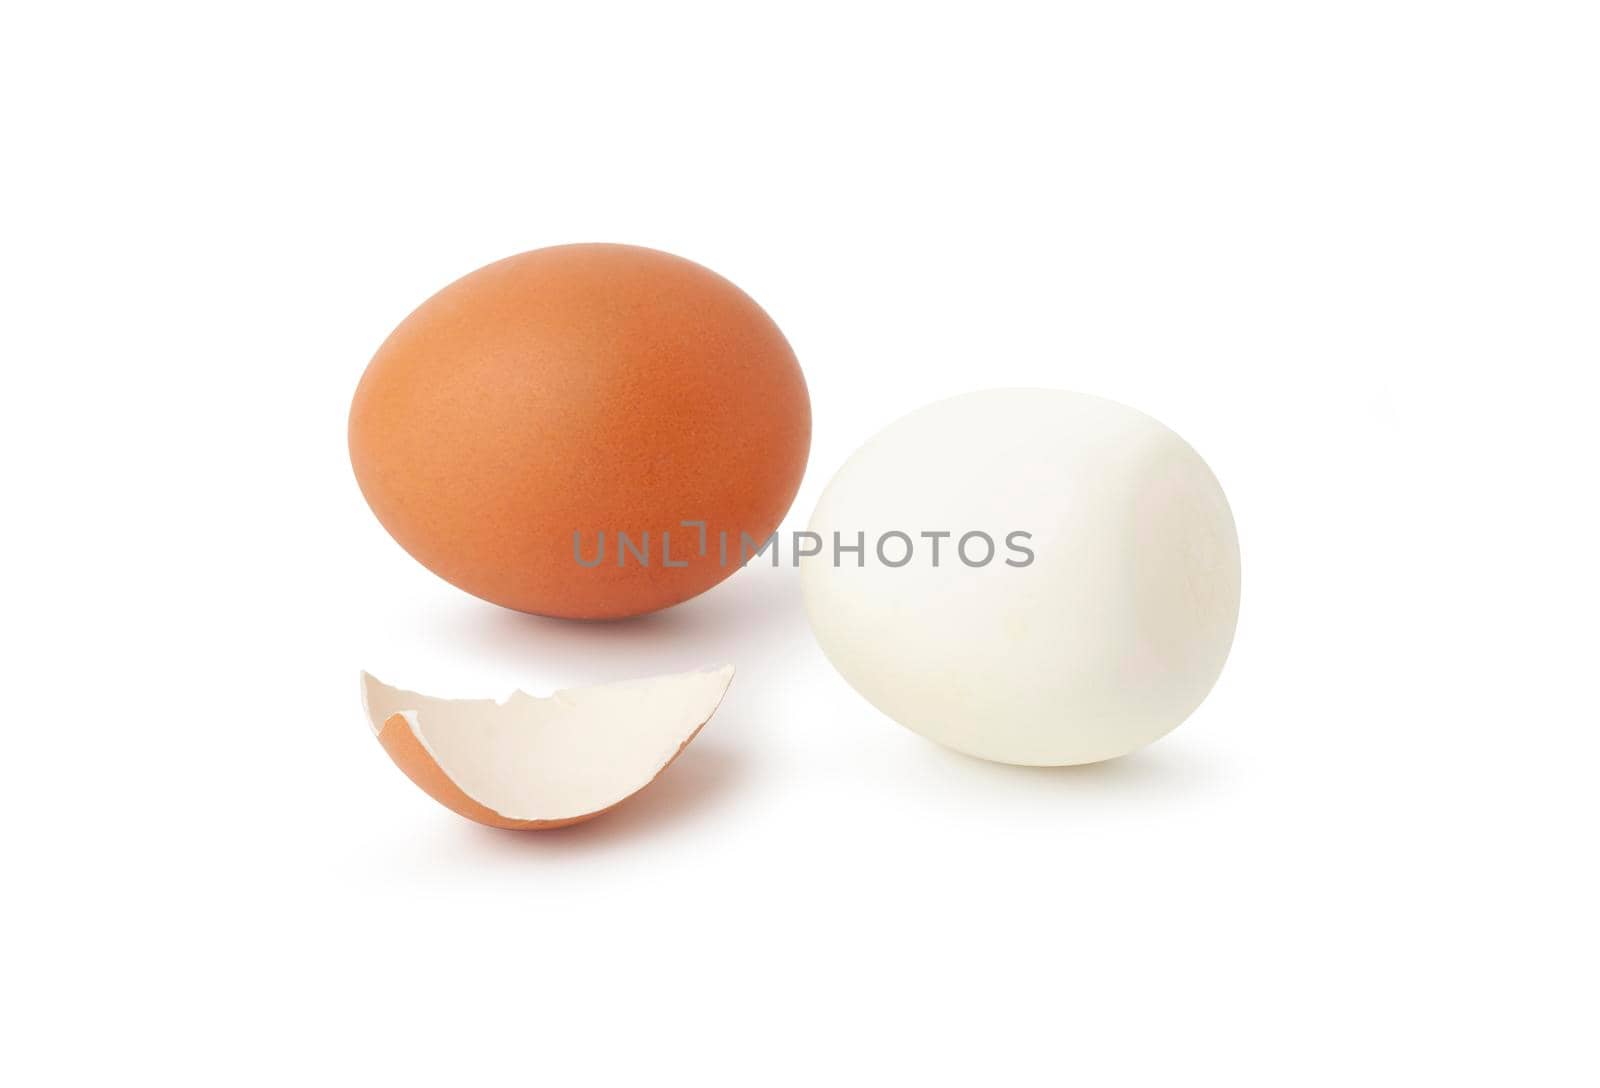 Peeled boiled egg isolated on white background with clipping path